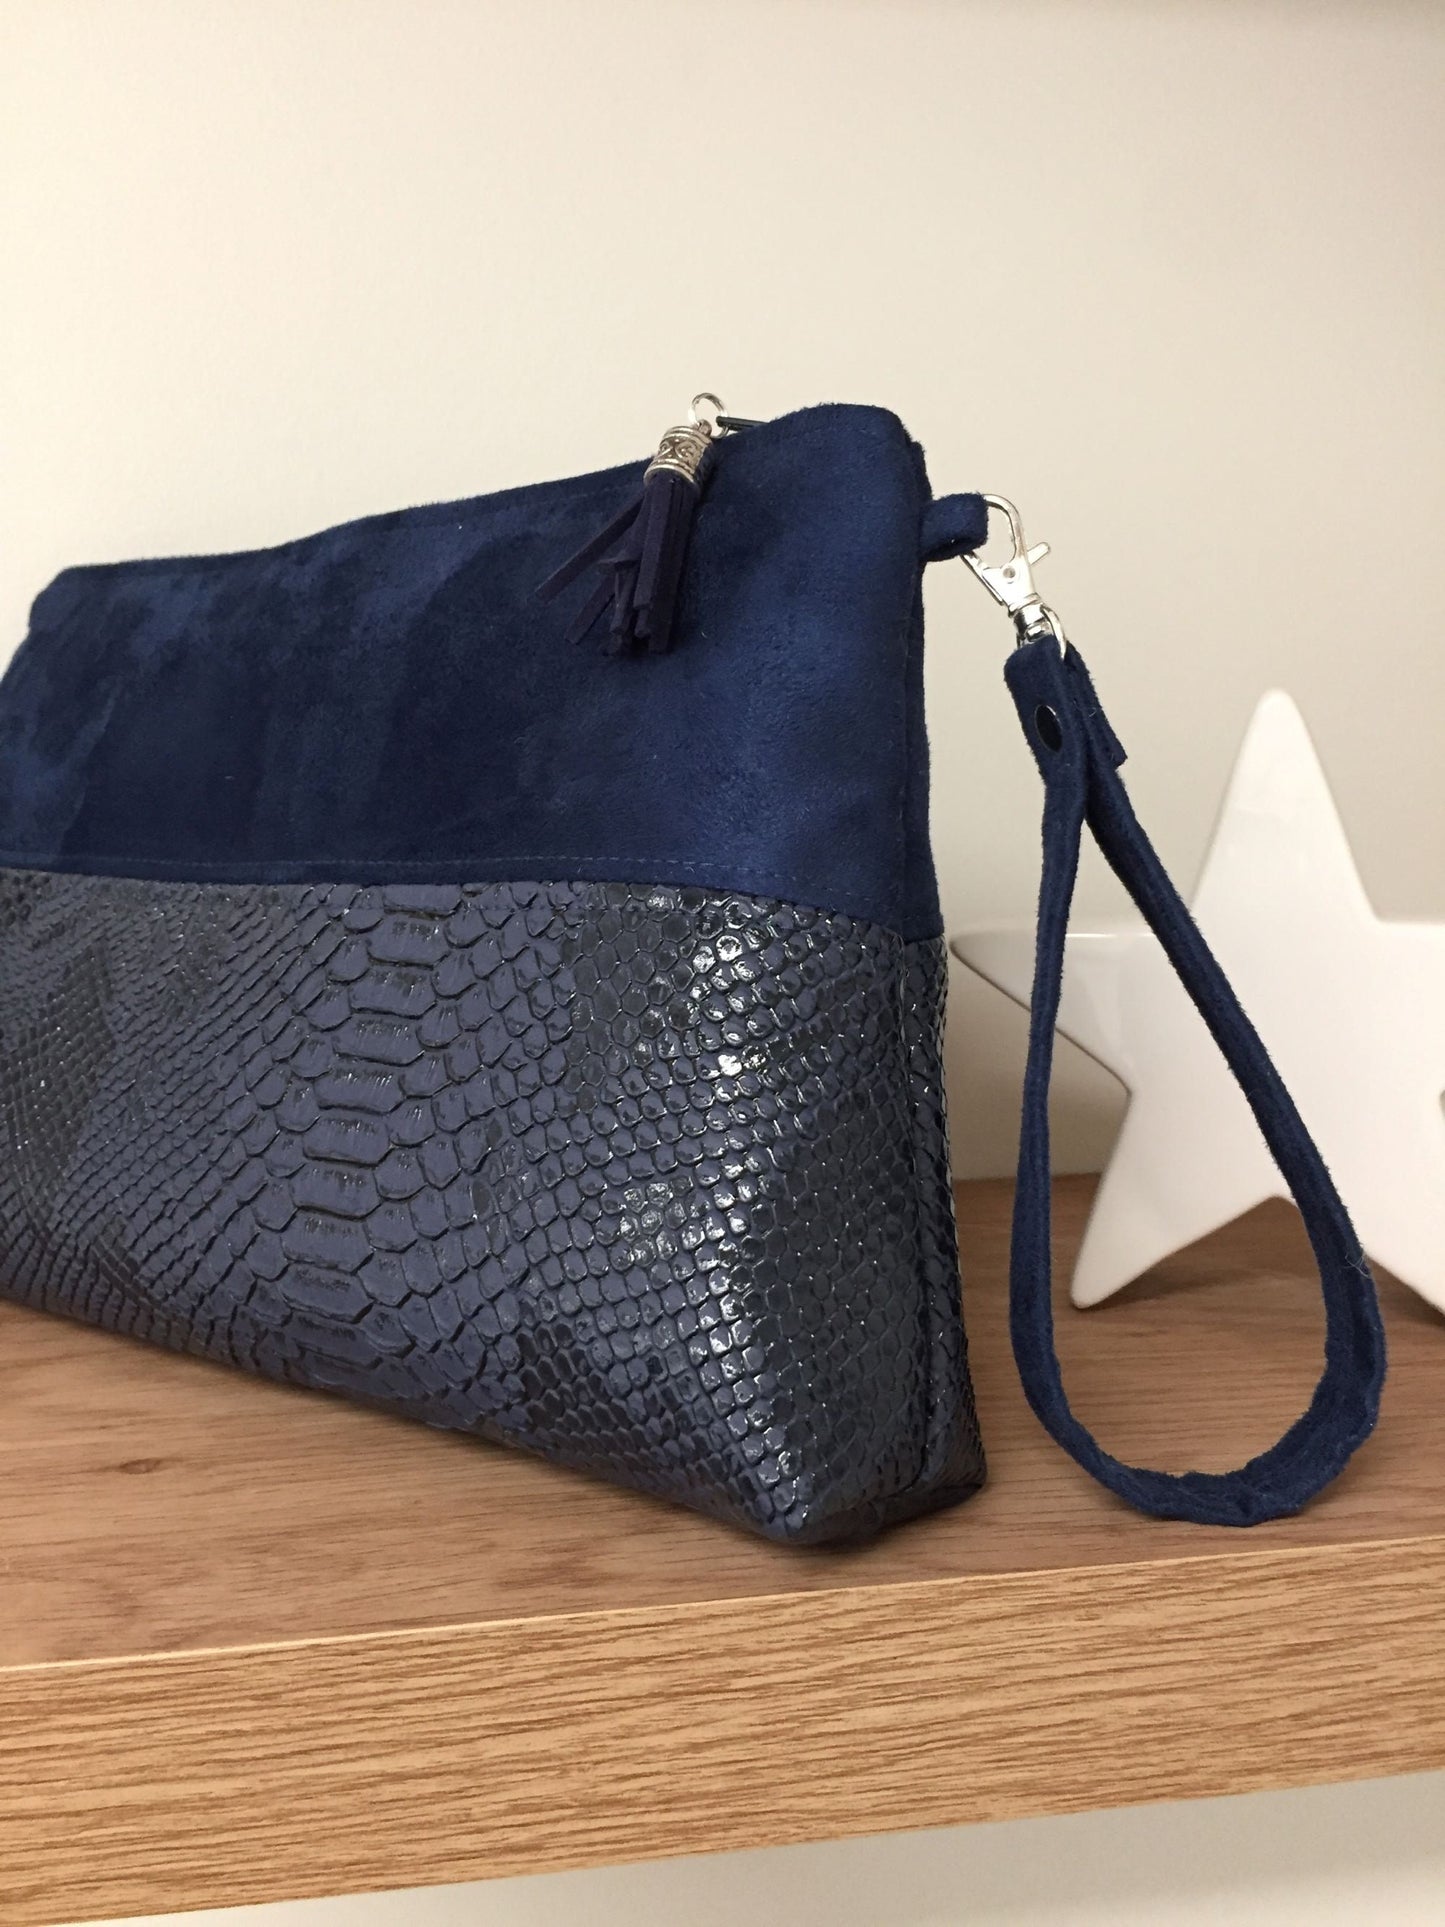 The Isa navy blue reptile-style zipped pouch with removable wrist strap